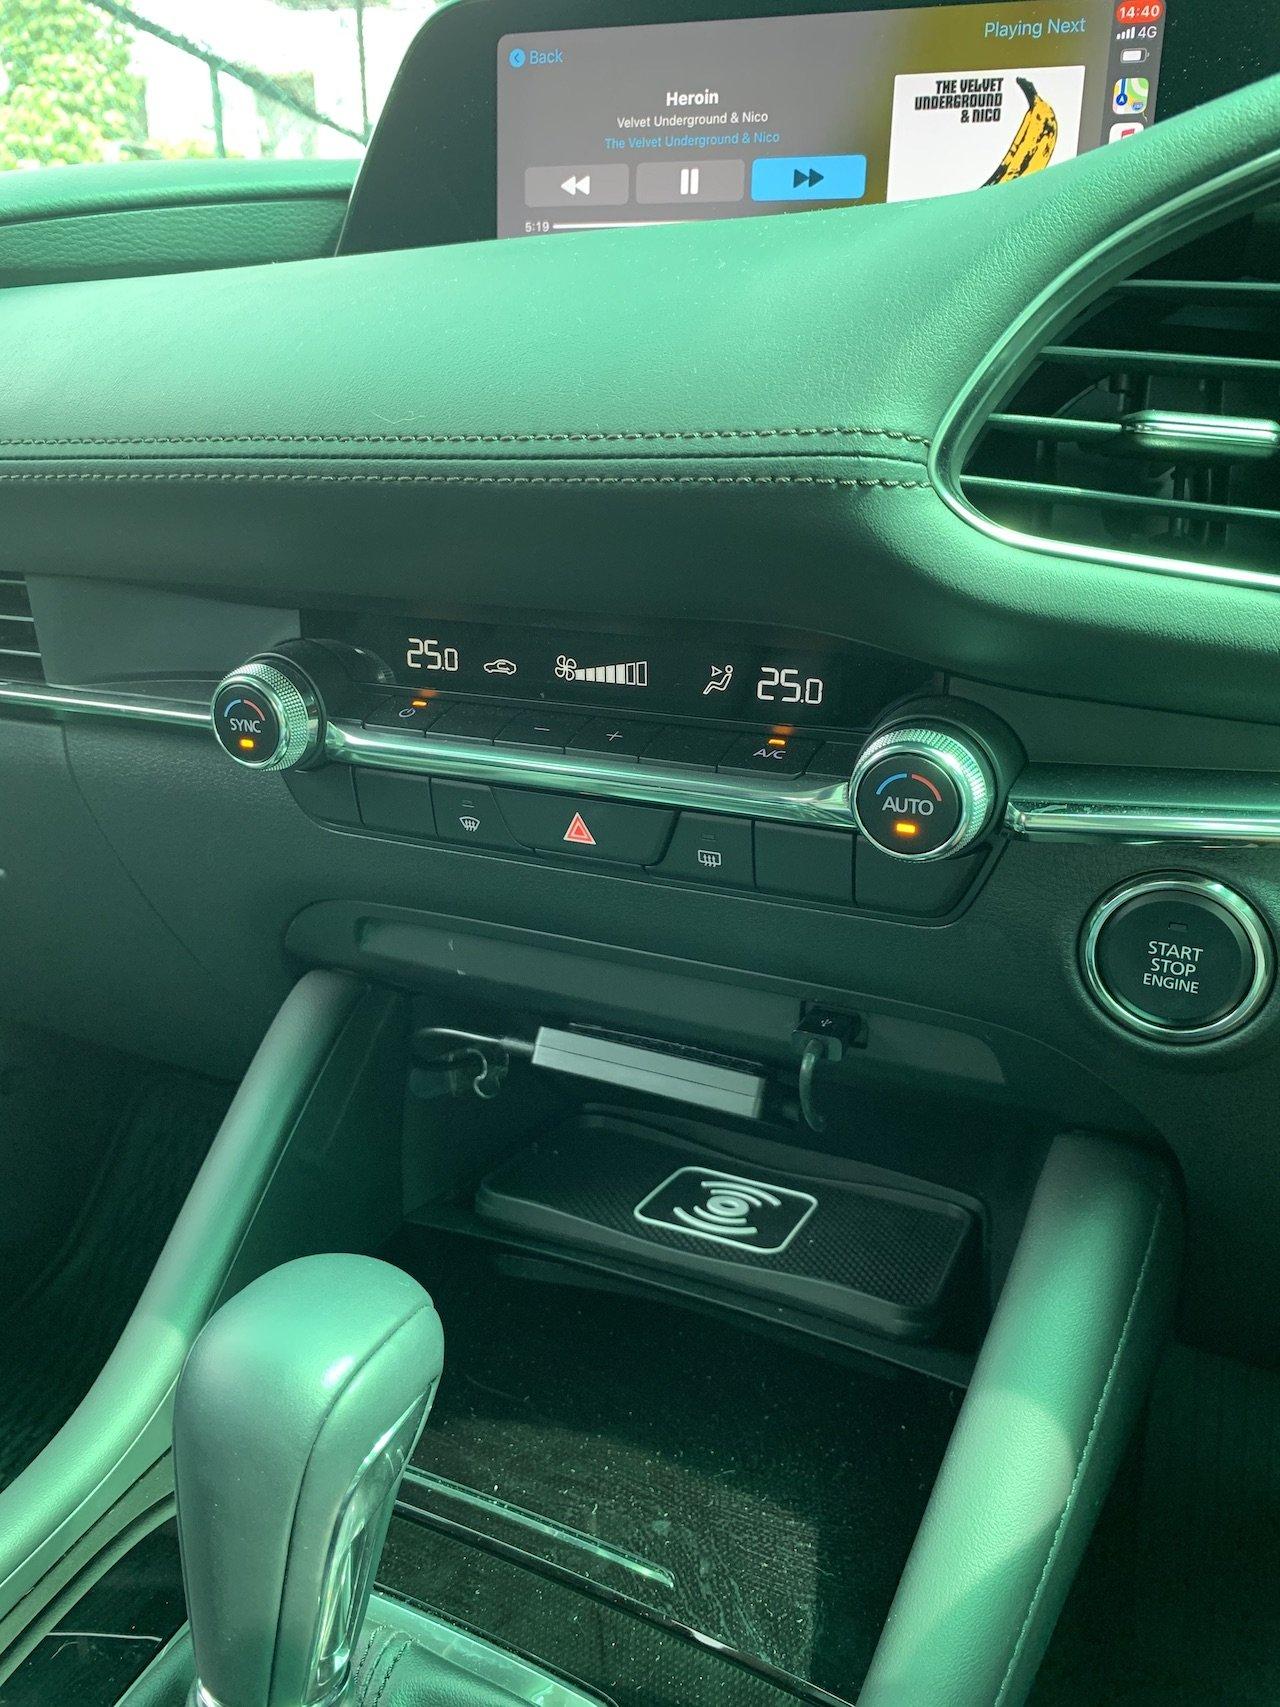 Intellidash Pro review: The easiest way to add wireless CarPlay to